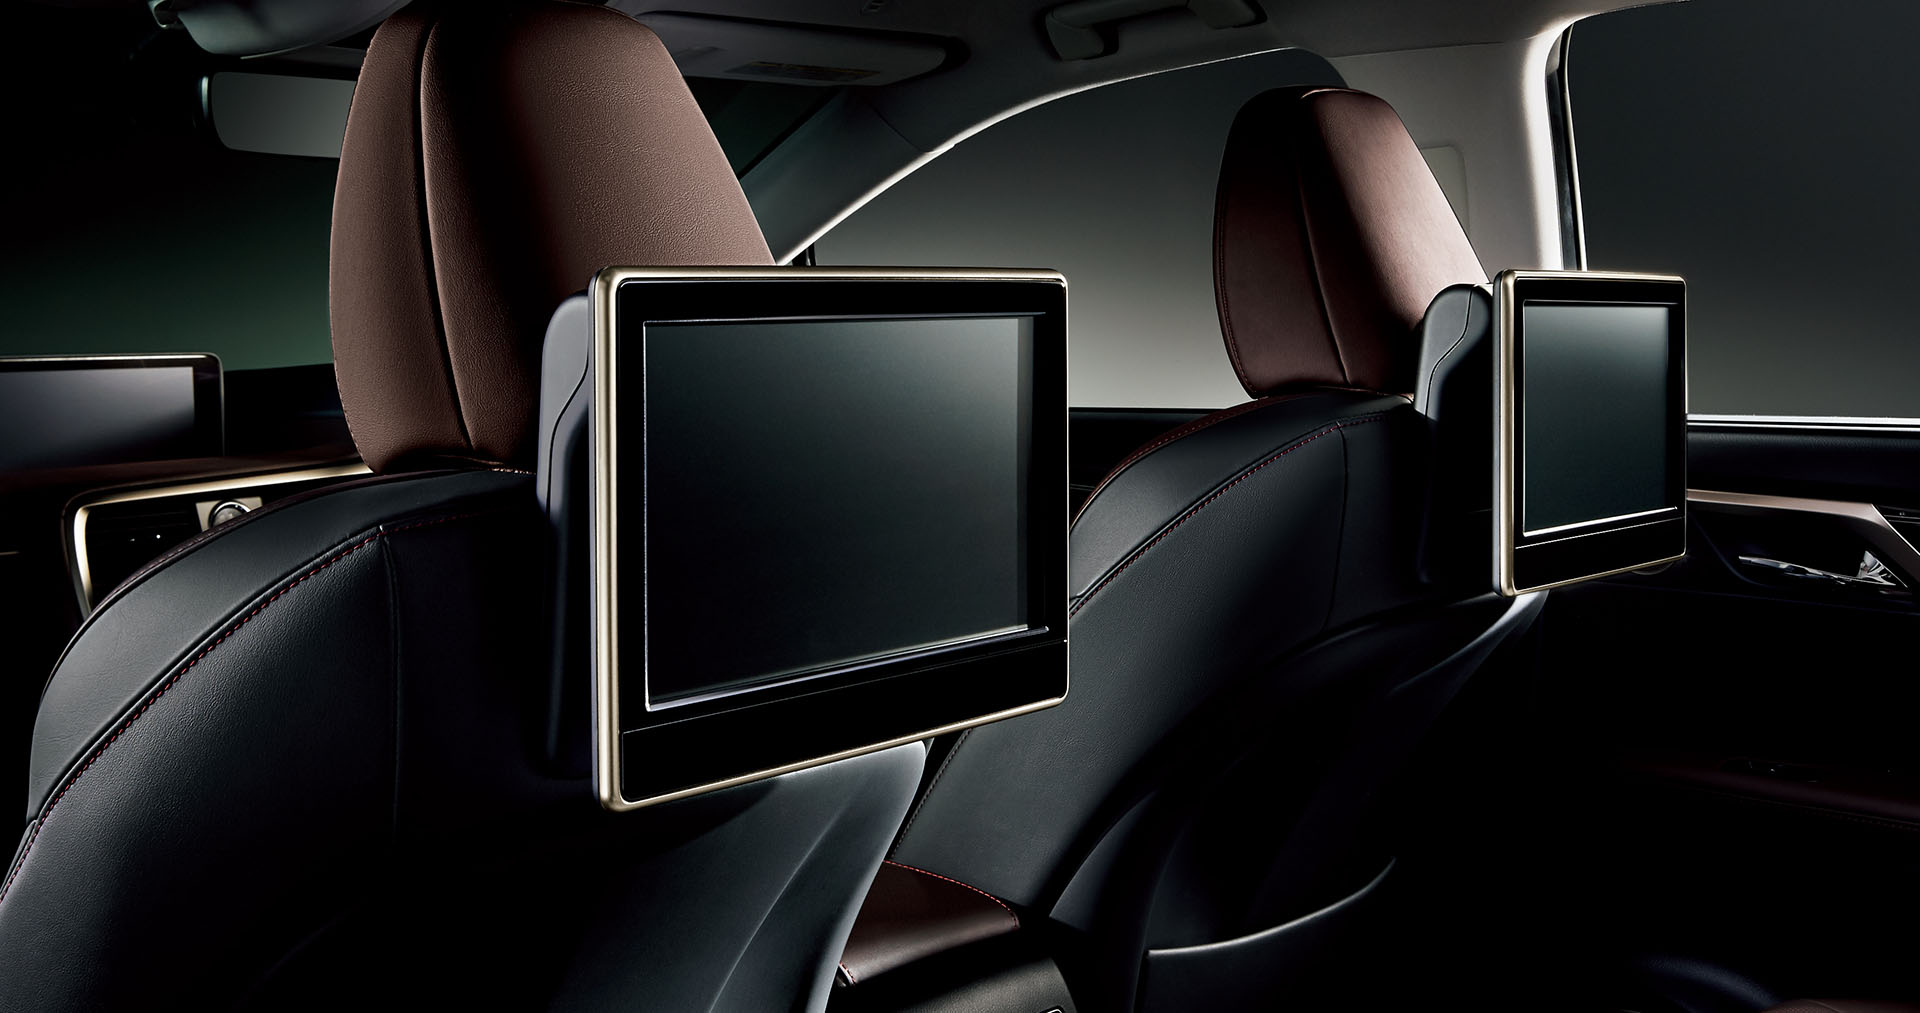 Rear seat entertainment system Toyota Motor Corporation Official